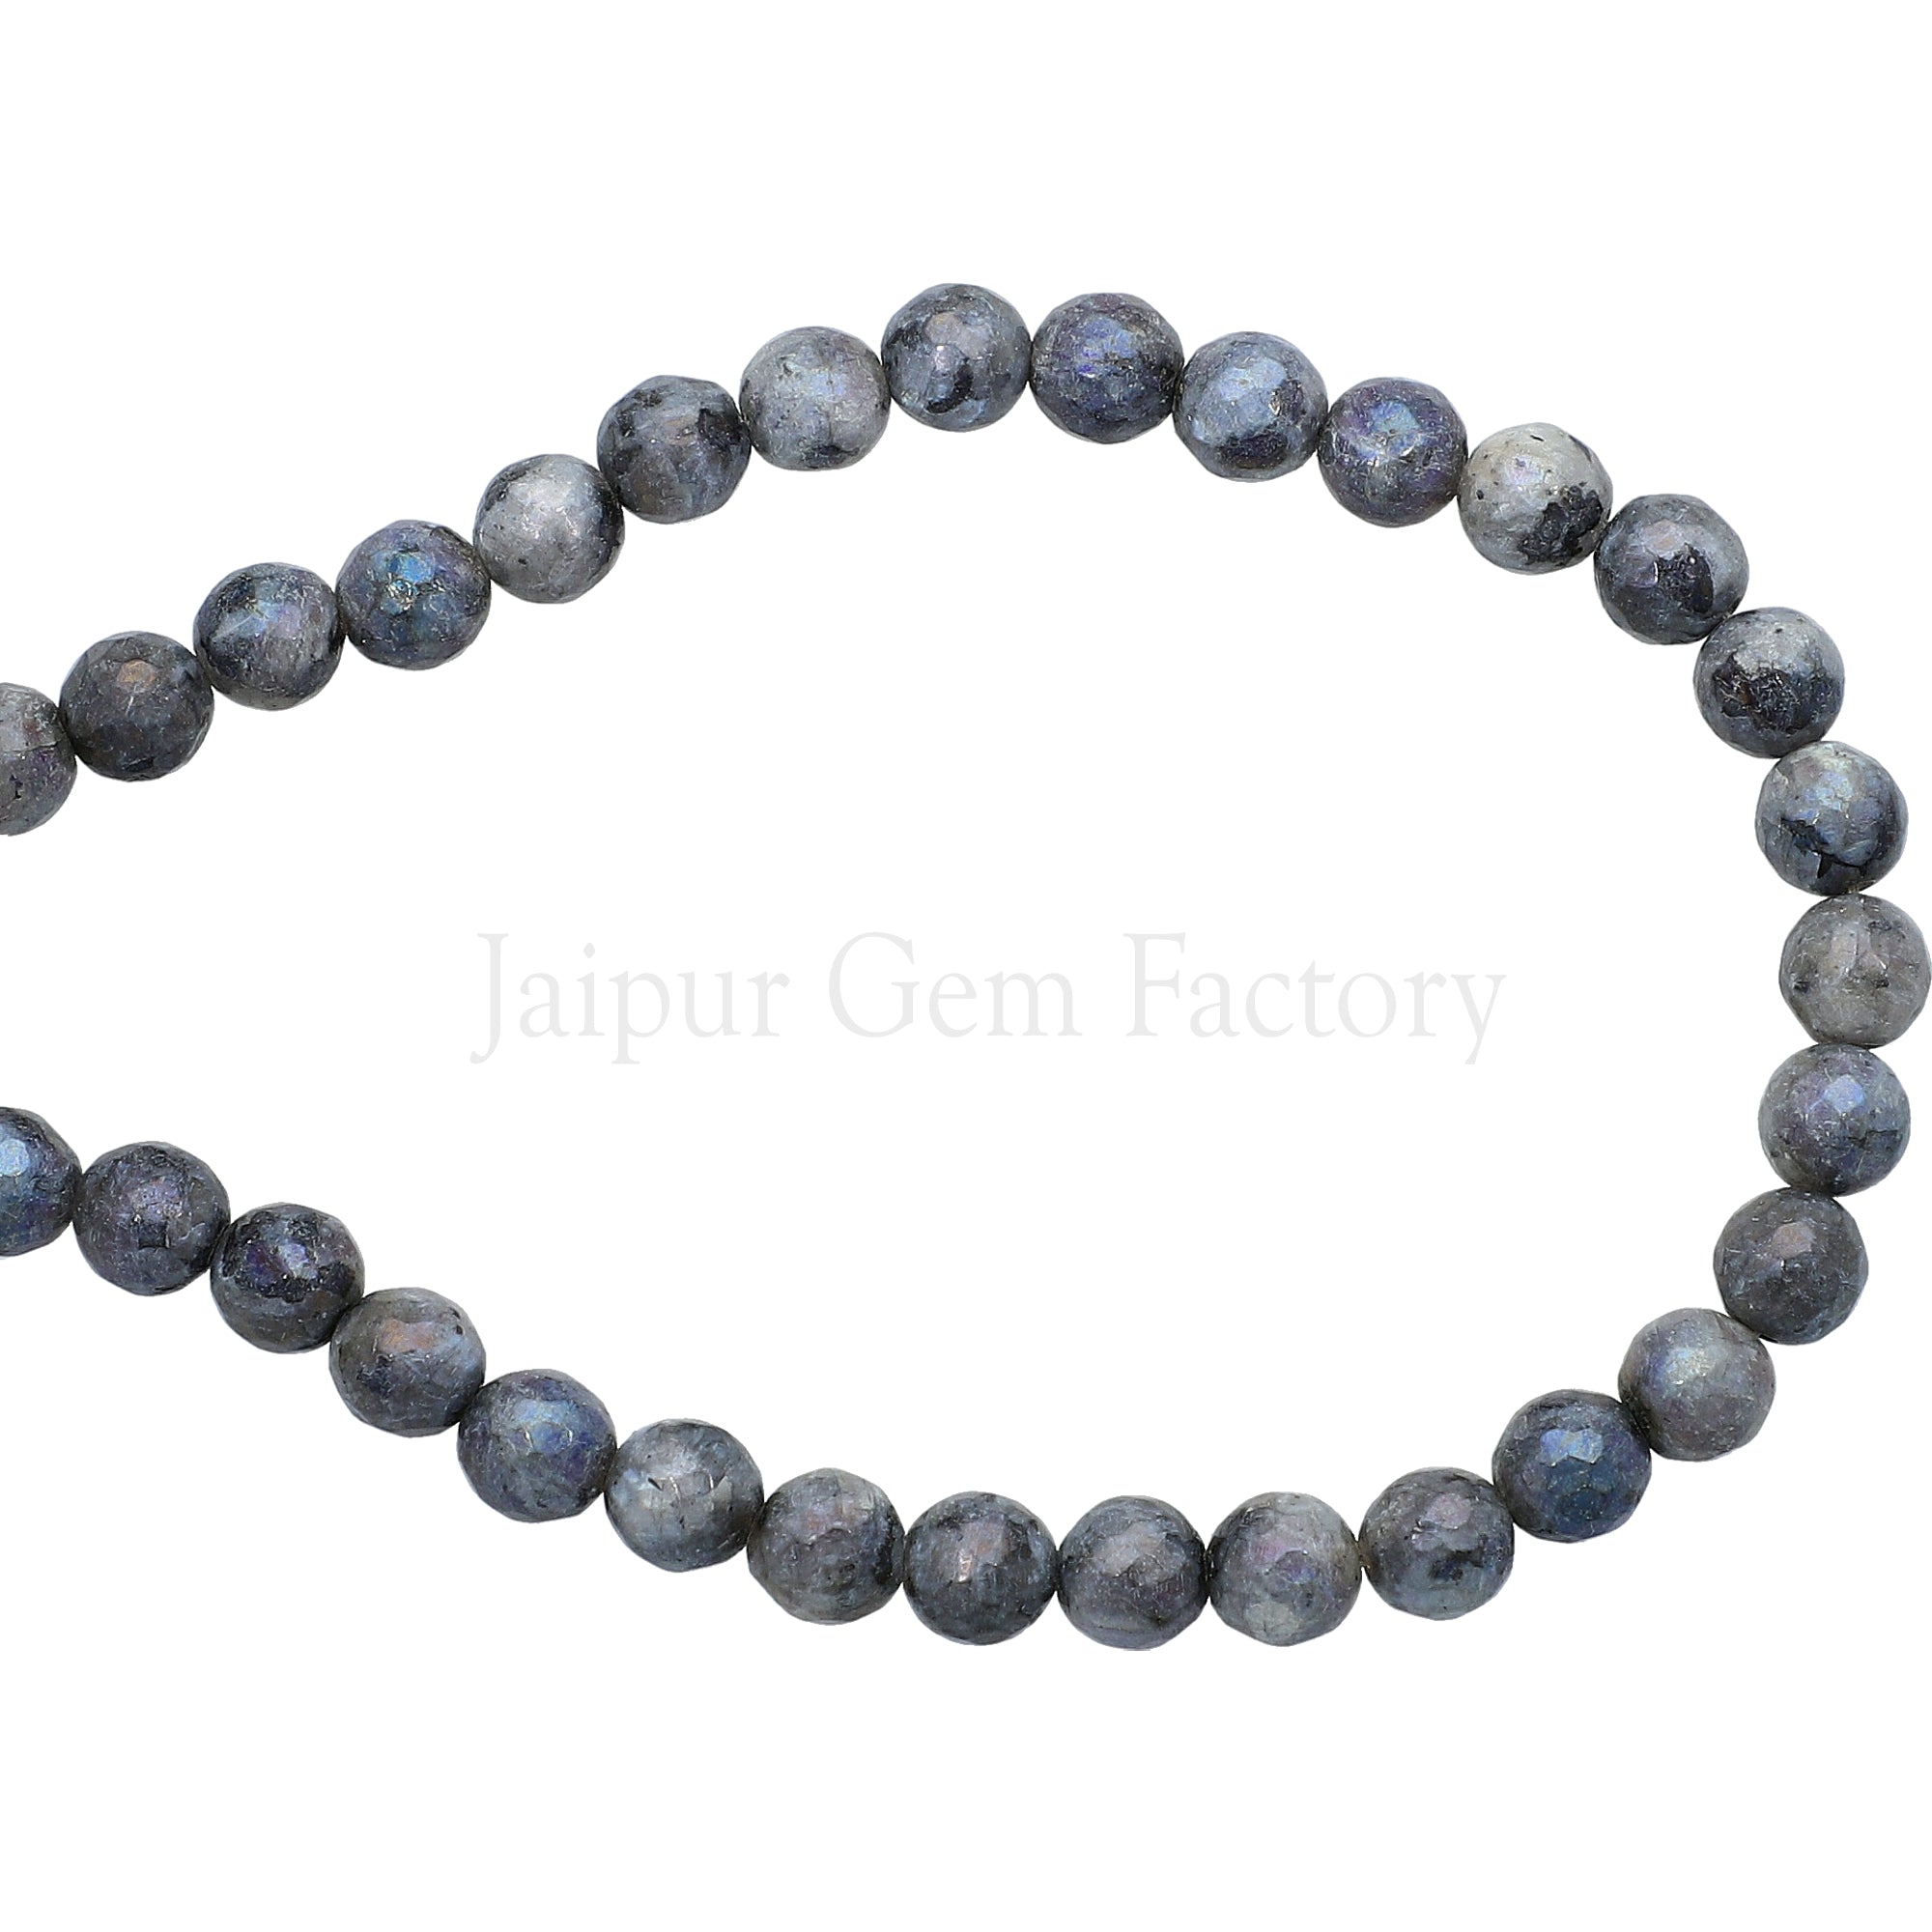 6 MM Mystic Coated Larvikite Faceted Round Beads 15 Inches Strand